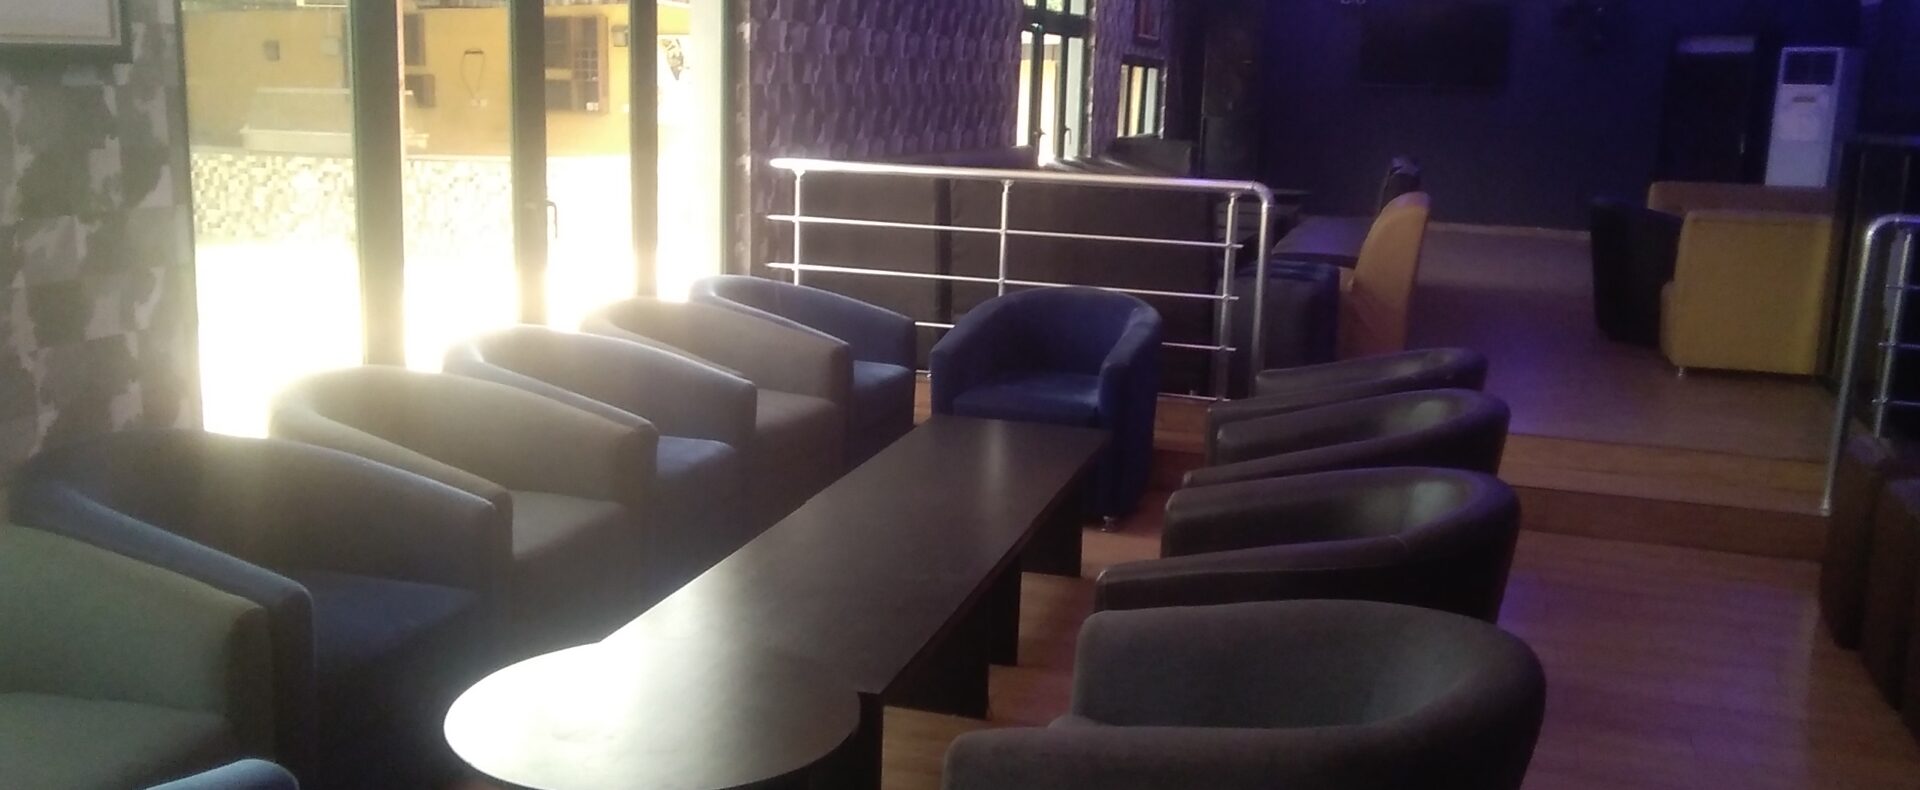 An Exquisite Bar Hall For Your Relaxation Event Venue In Victoria Island Nigeria